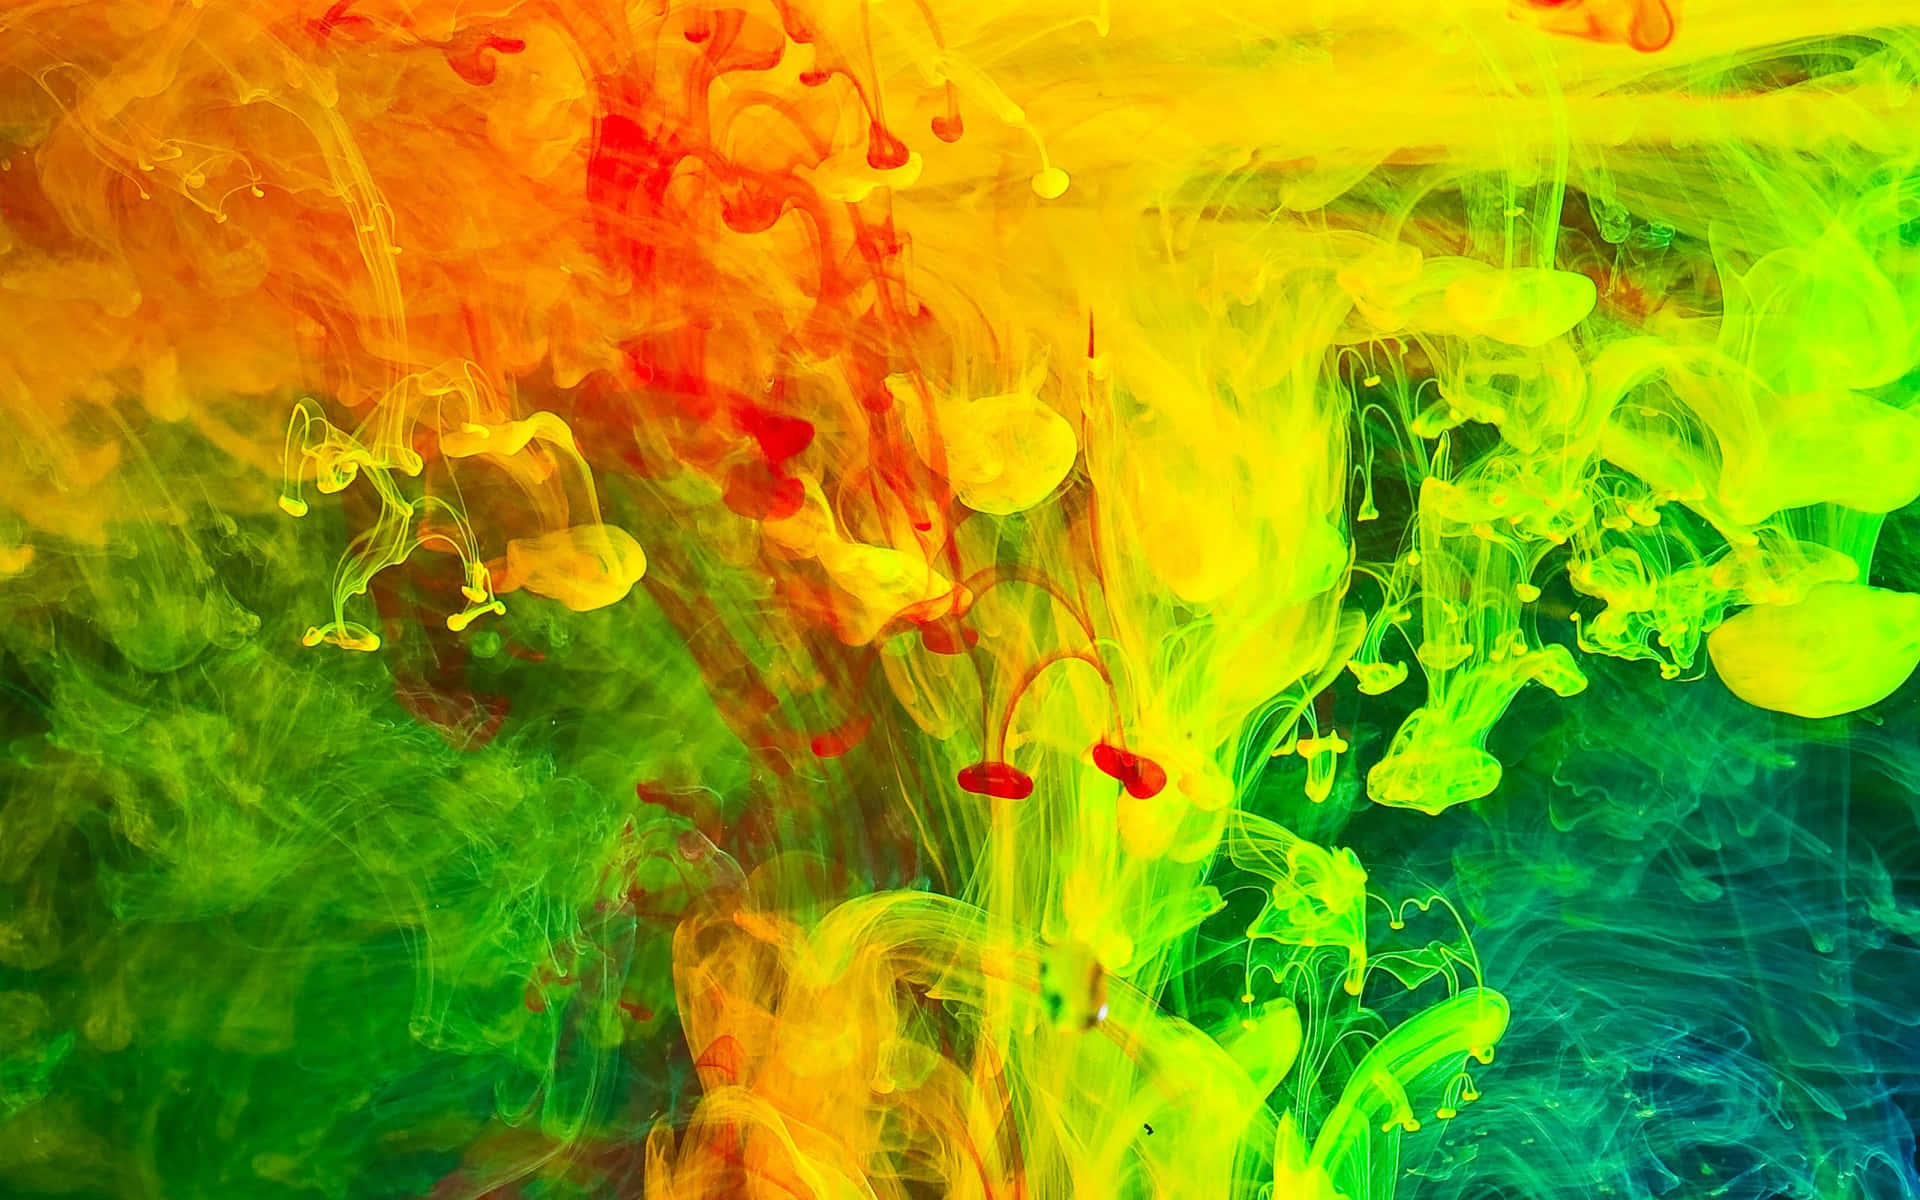 Colorful Explosion of Joy